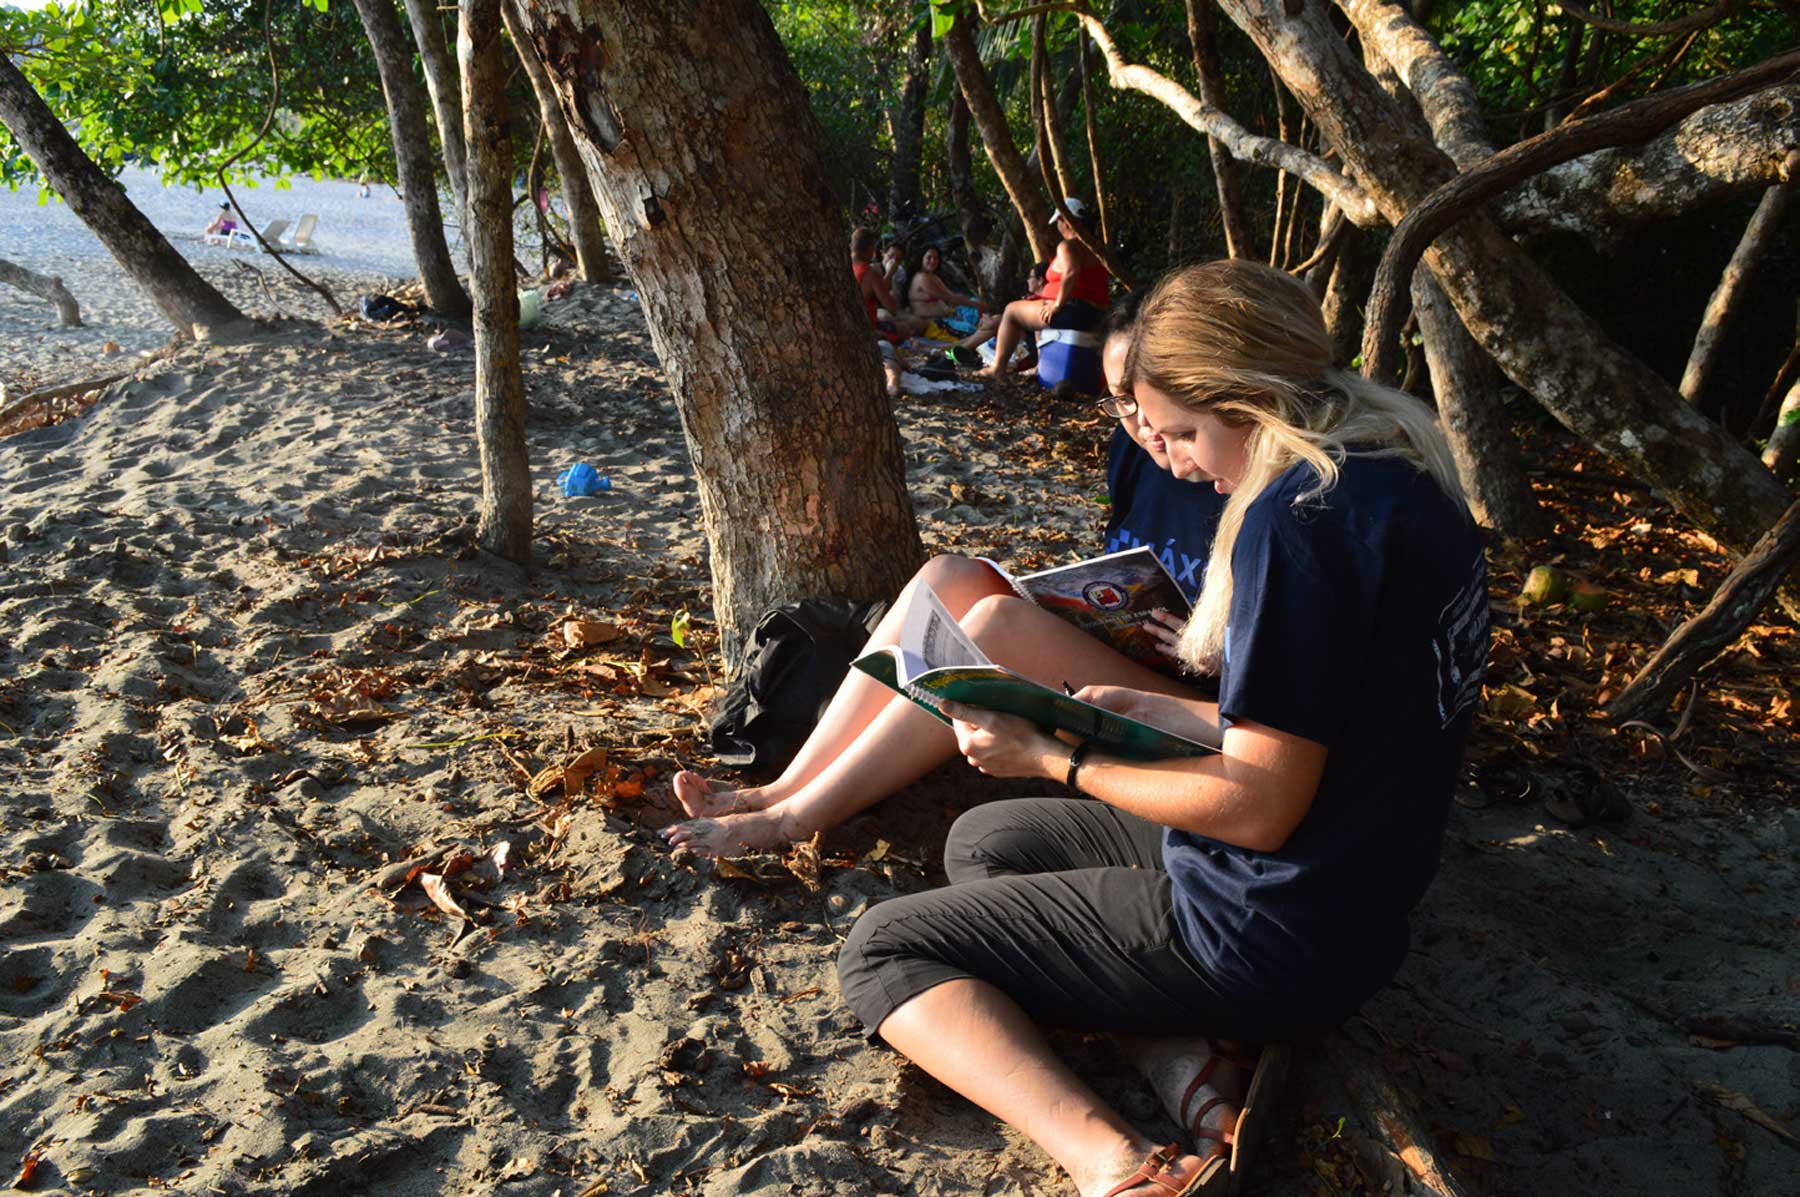 Photo: Students studying together on costa rica beach